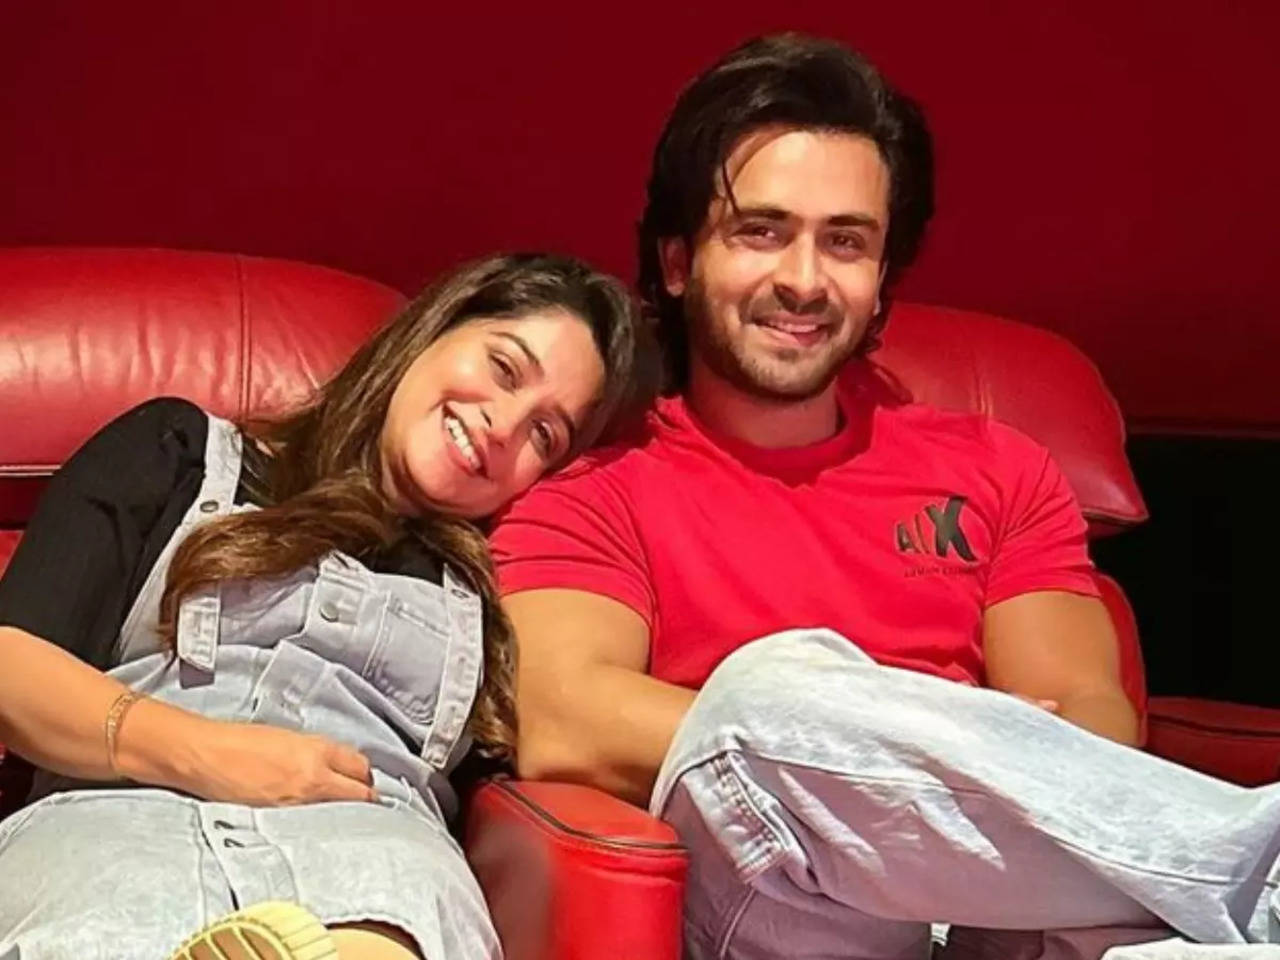 Mom-to-be Dipika Kakar surprises husband Shoaib Ibrahim with gifts as they  near their 5th wedding anniversary - Times of India